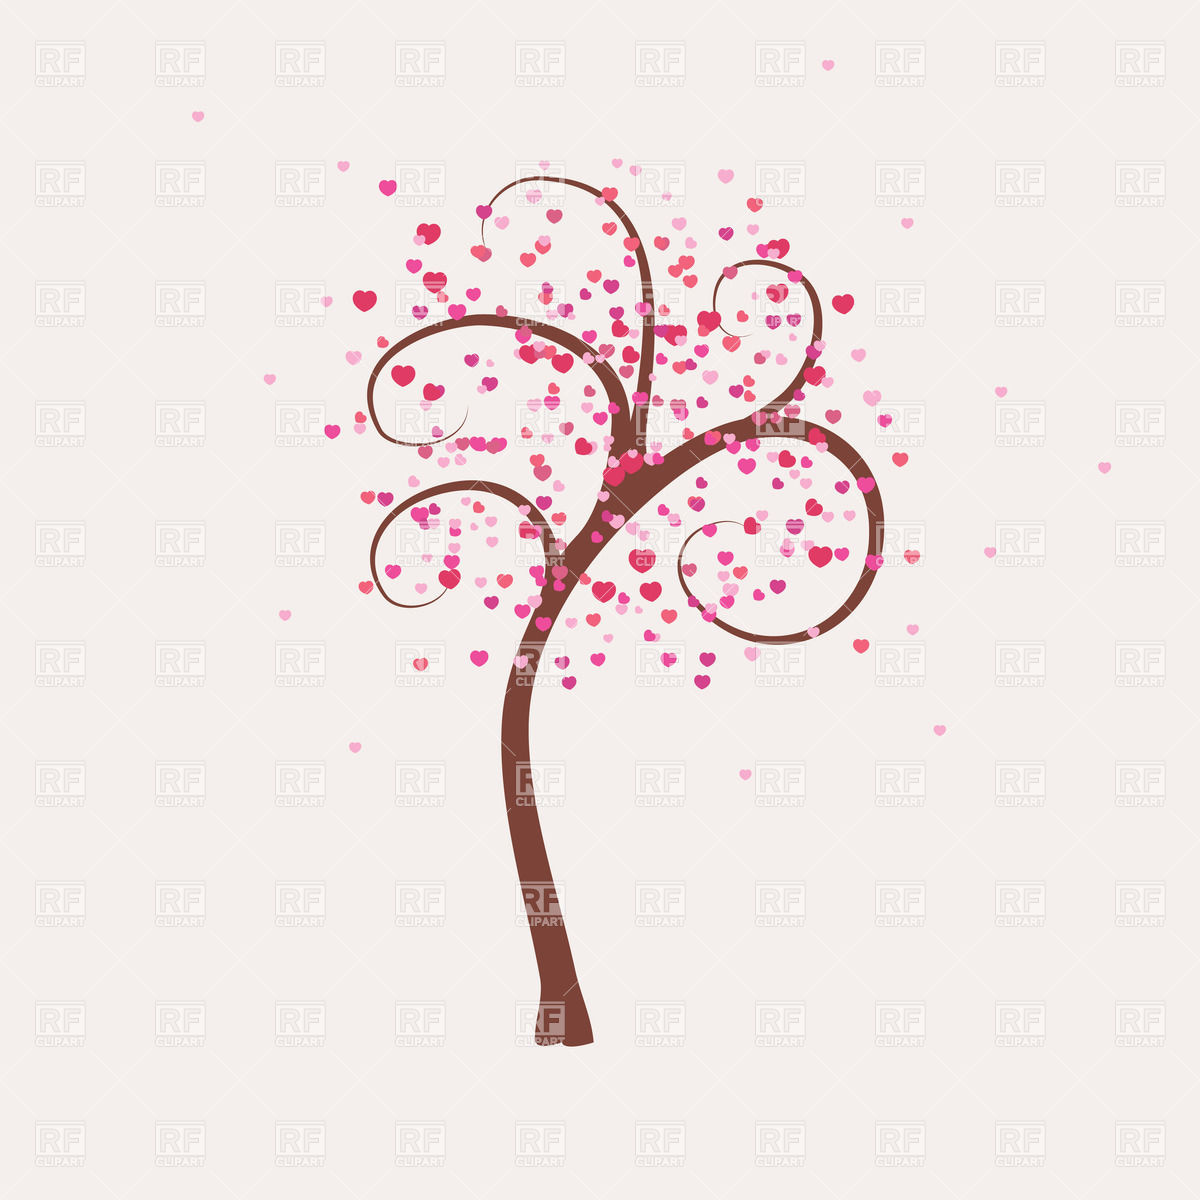 Pink Blooming Spring Tree With Curly Branches 22310 Download Royalty